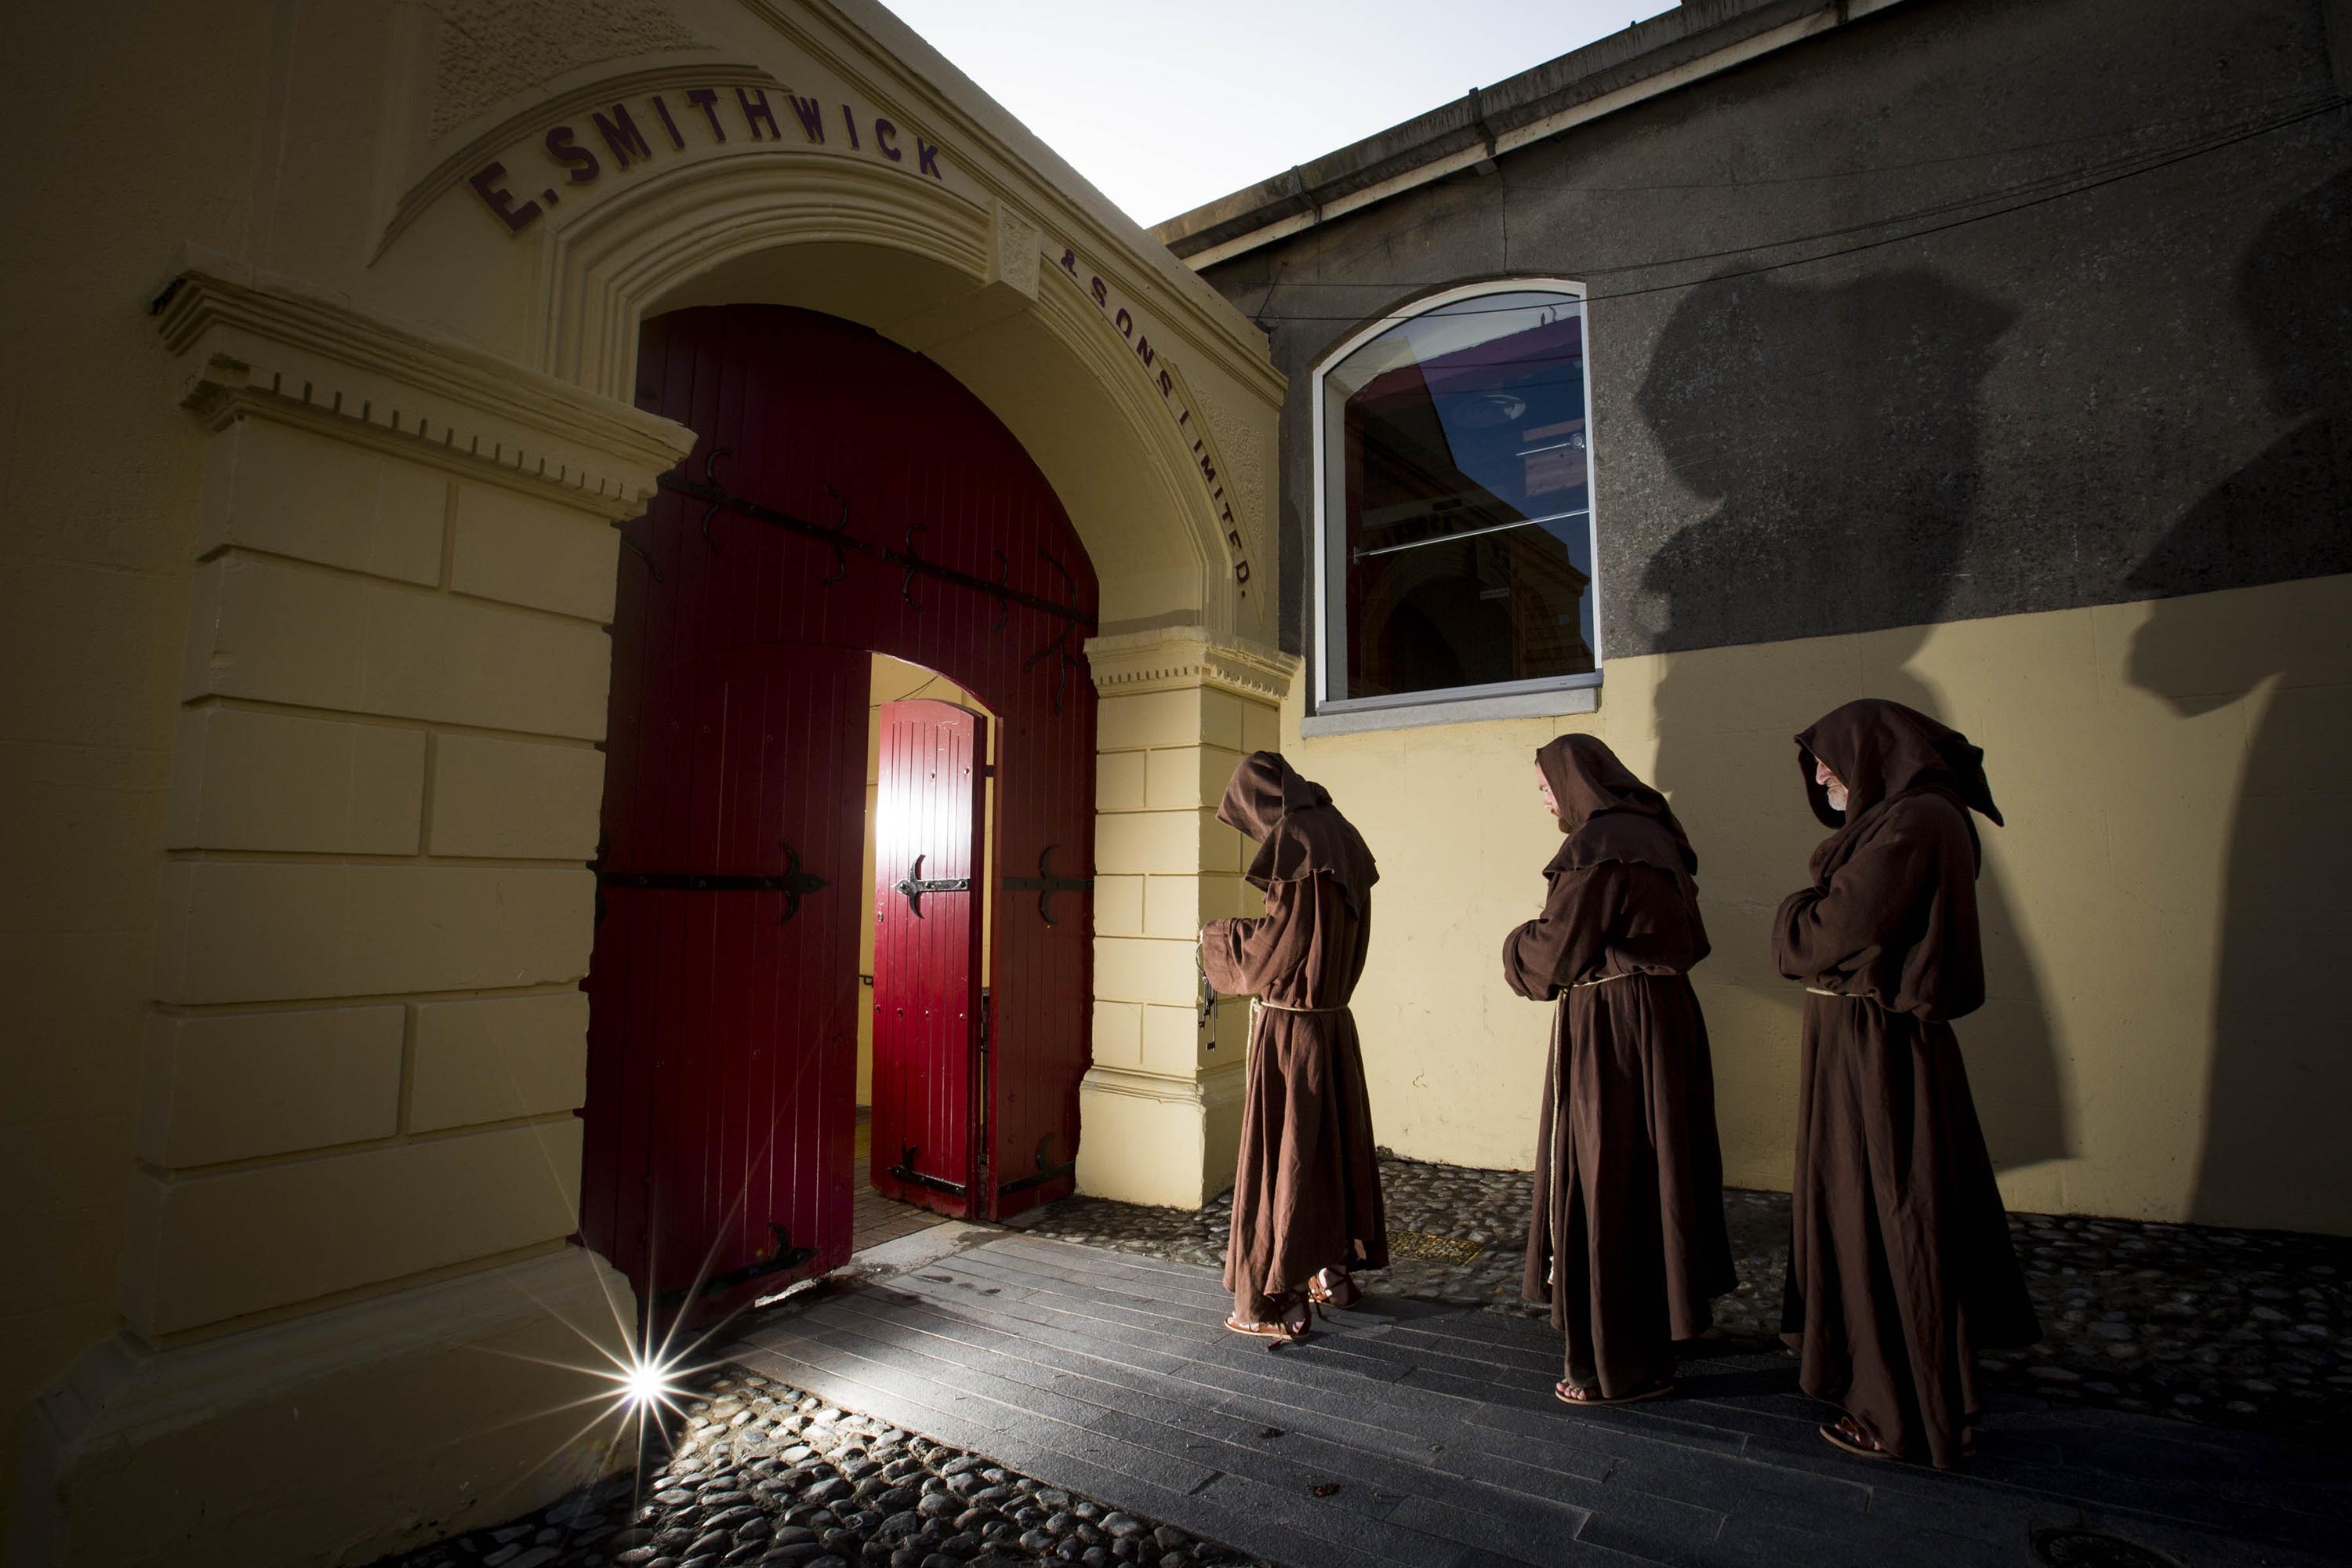 Ireland’s newest visitor attraction, Smithwick’s Experience Kilkenny, was officially launched on 28 August 2014. Three Franciscan monks, played by actors Patrick Moylan, Jason Reilly and Thomas Doran, took a step back in time to 1231 to commemorate the medieval origins of brewing on the site of the Abbey of St. Francis